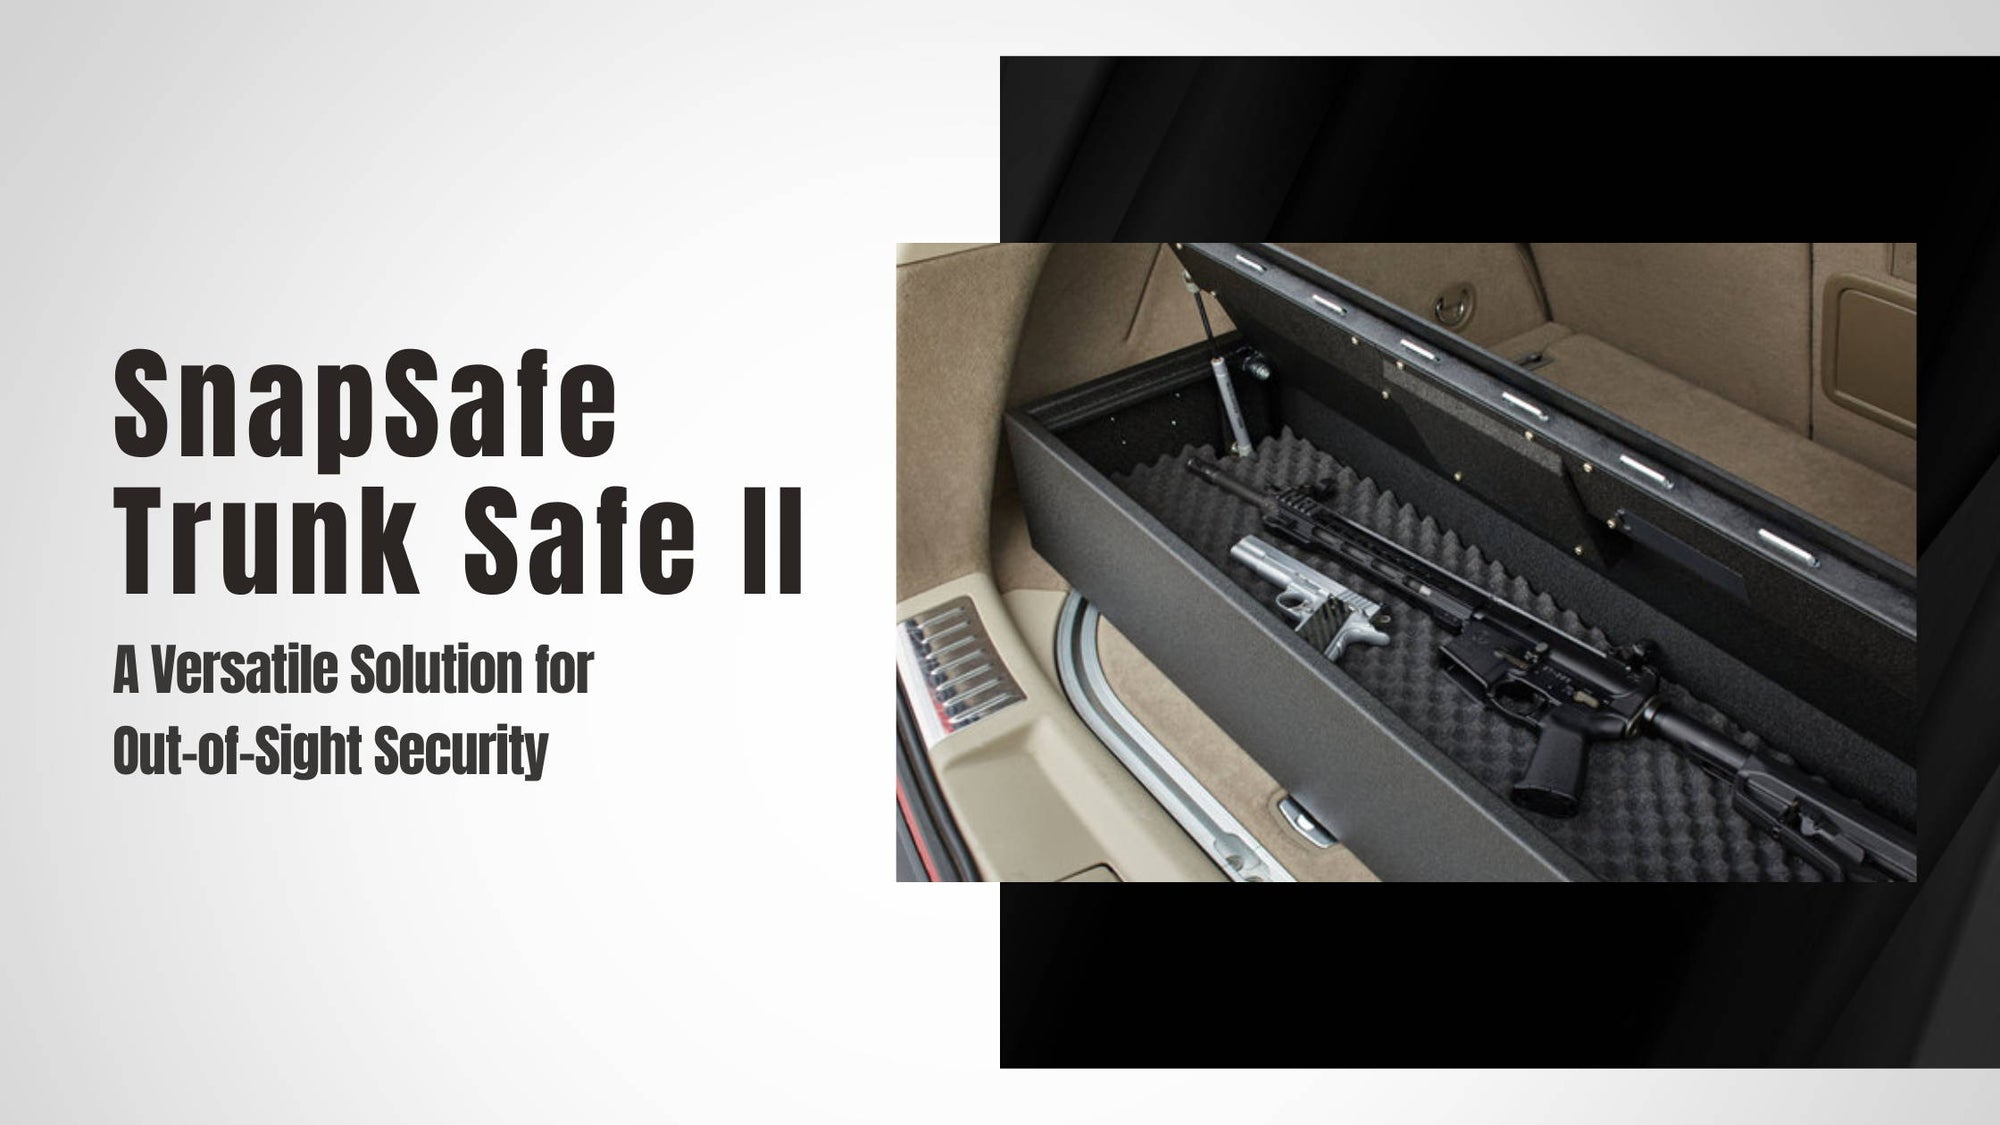 SnapSafe Trunk Safe II: A Versatile Solution for Out-of-Sight Security